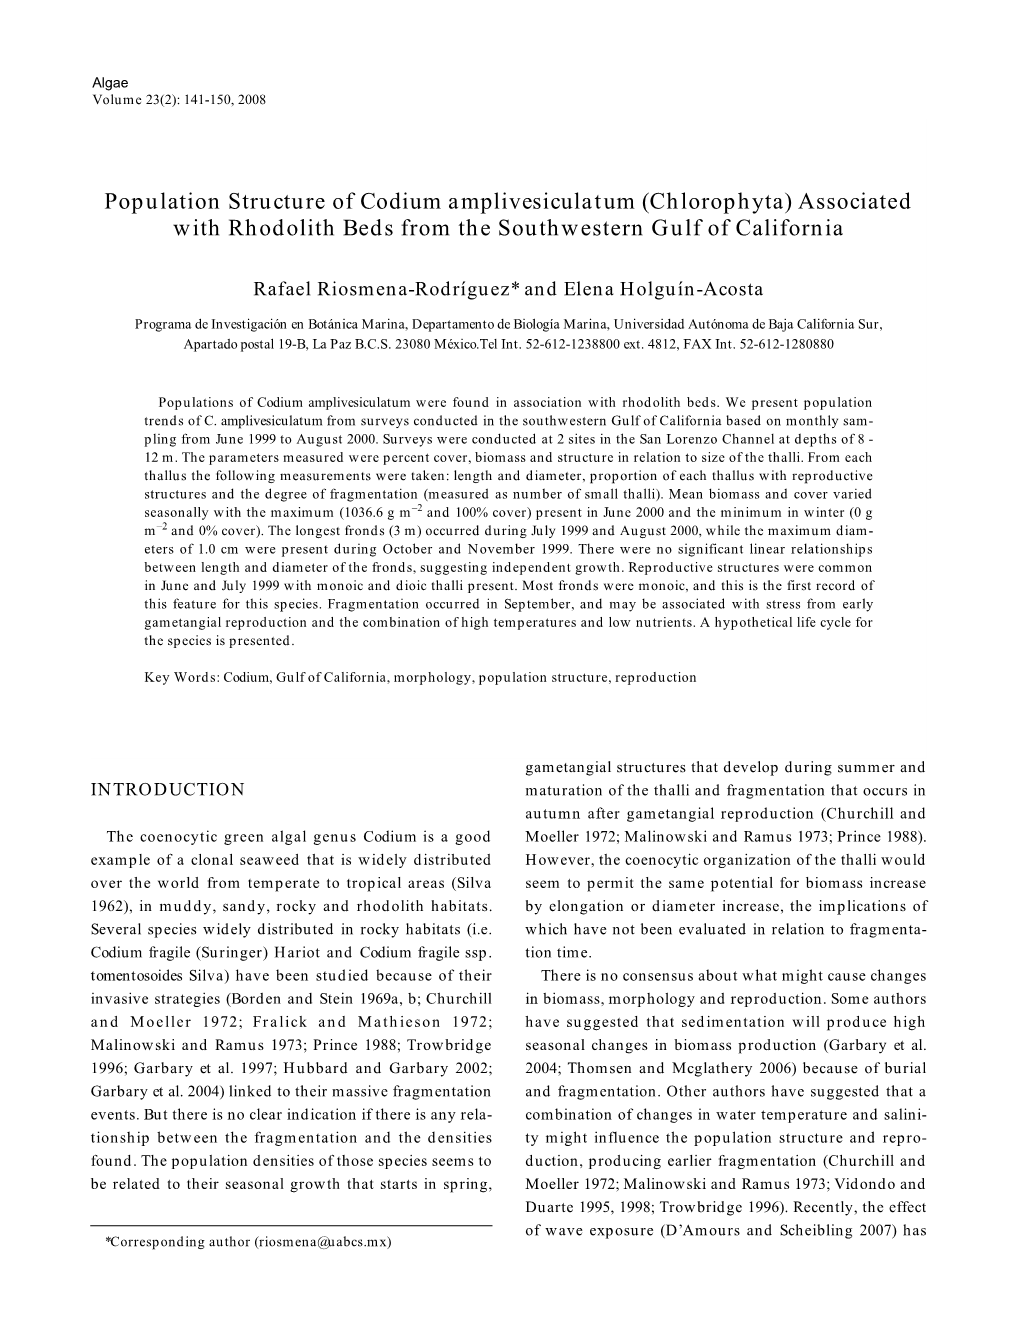 Population Structure of Codium Amplivesiculatum (Chlorophyta) Associated with Rhodolith Beds from the Southwestern Gulf of California